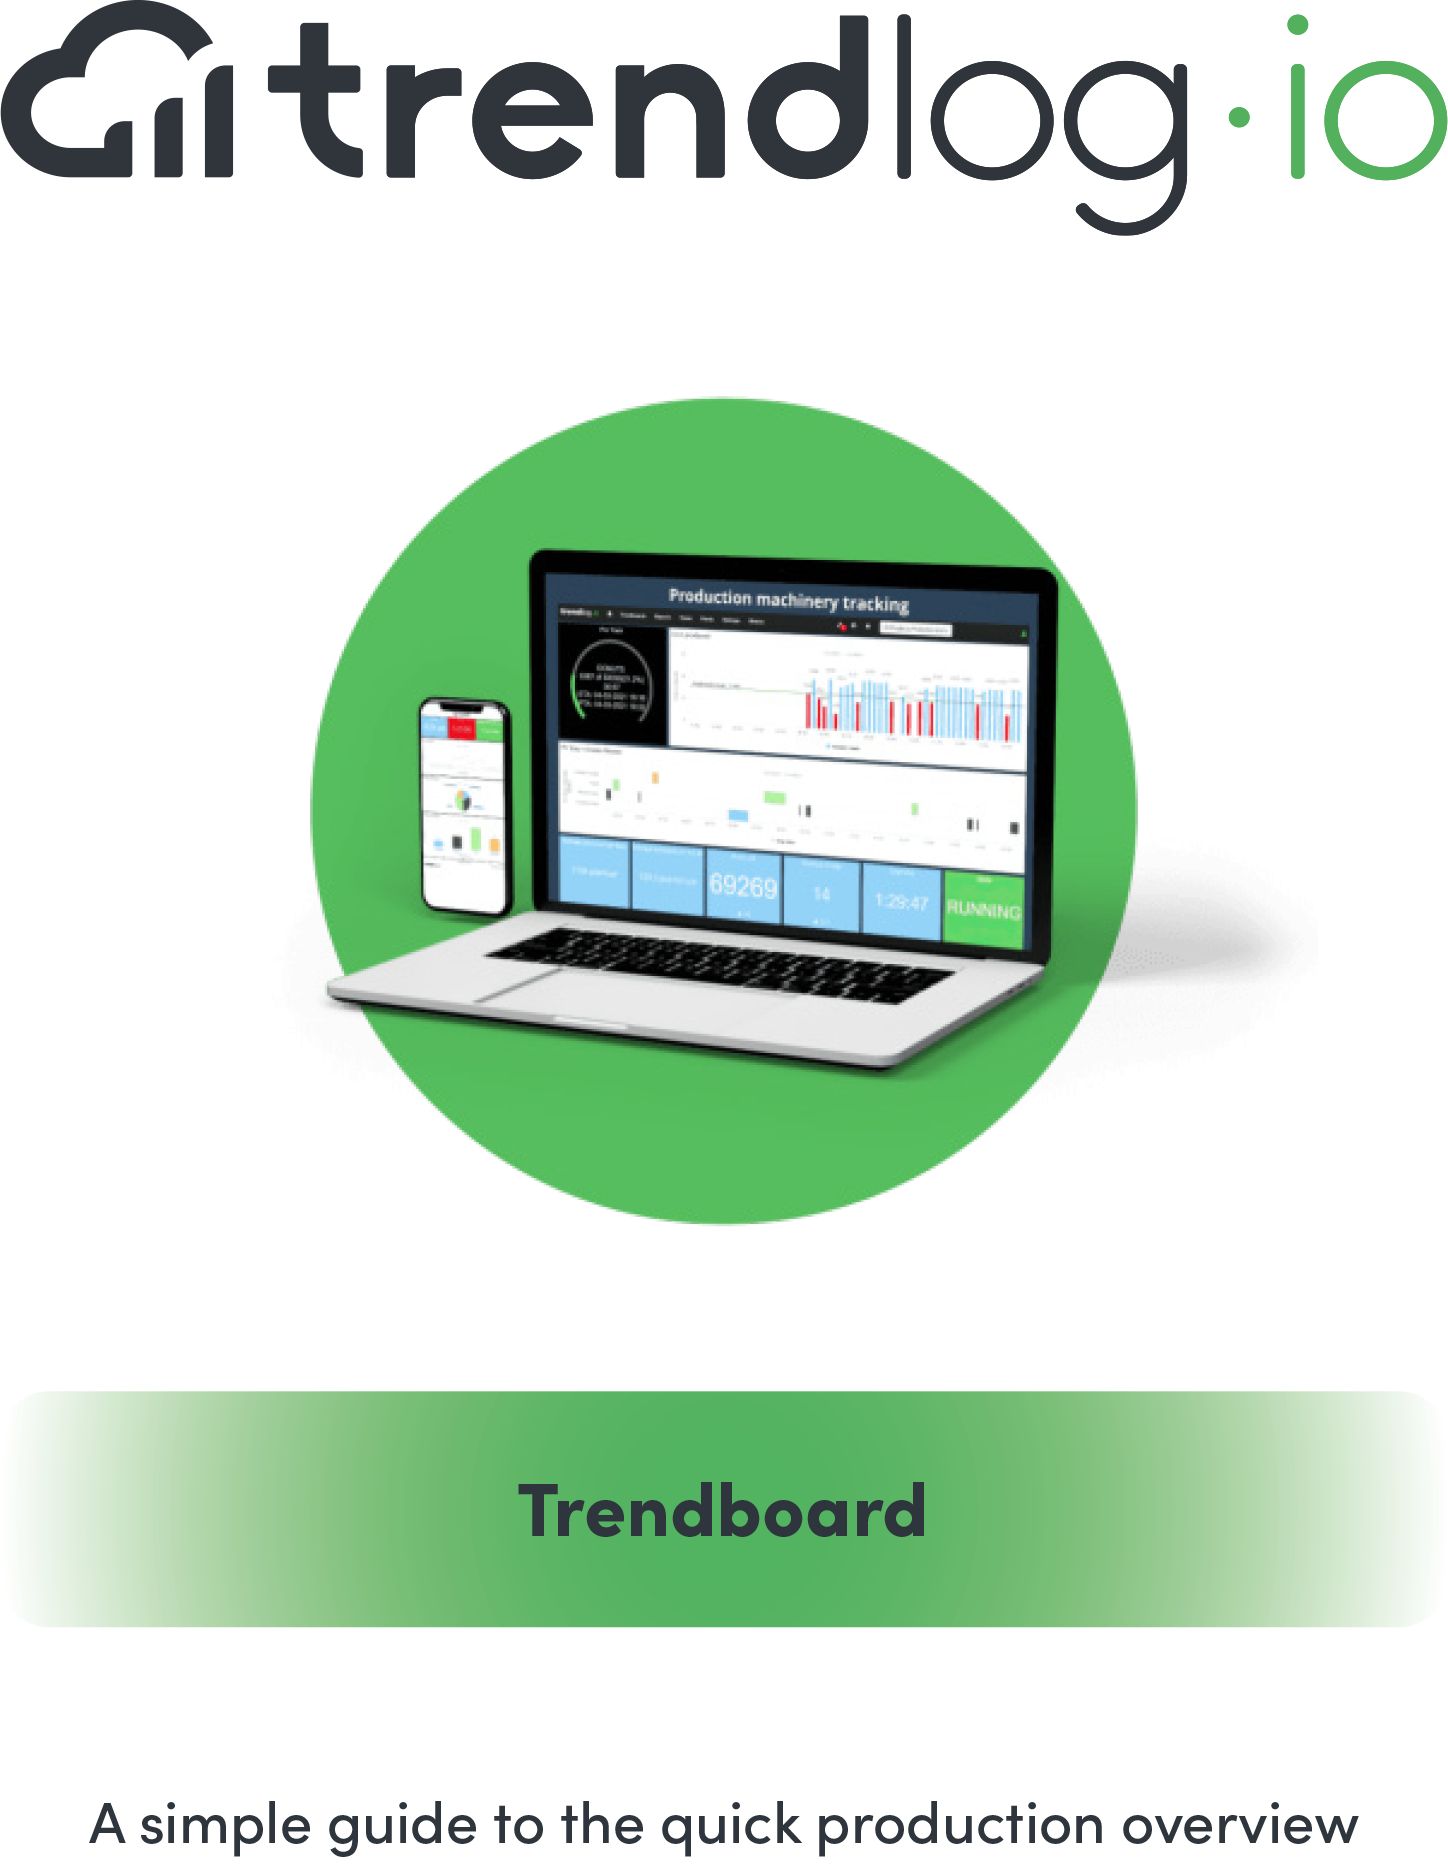 Trendboard manual - directions for use